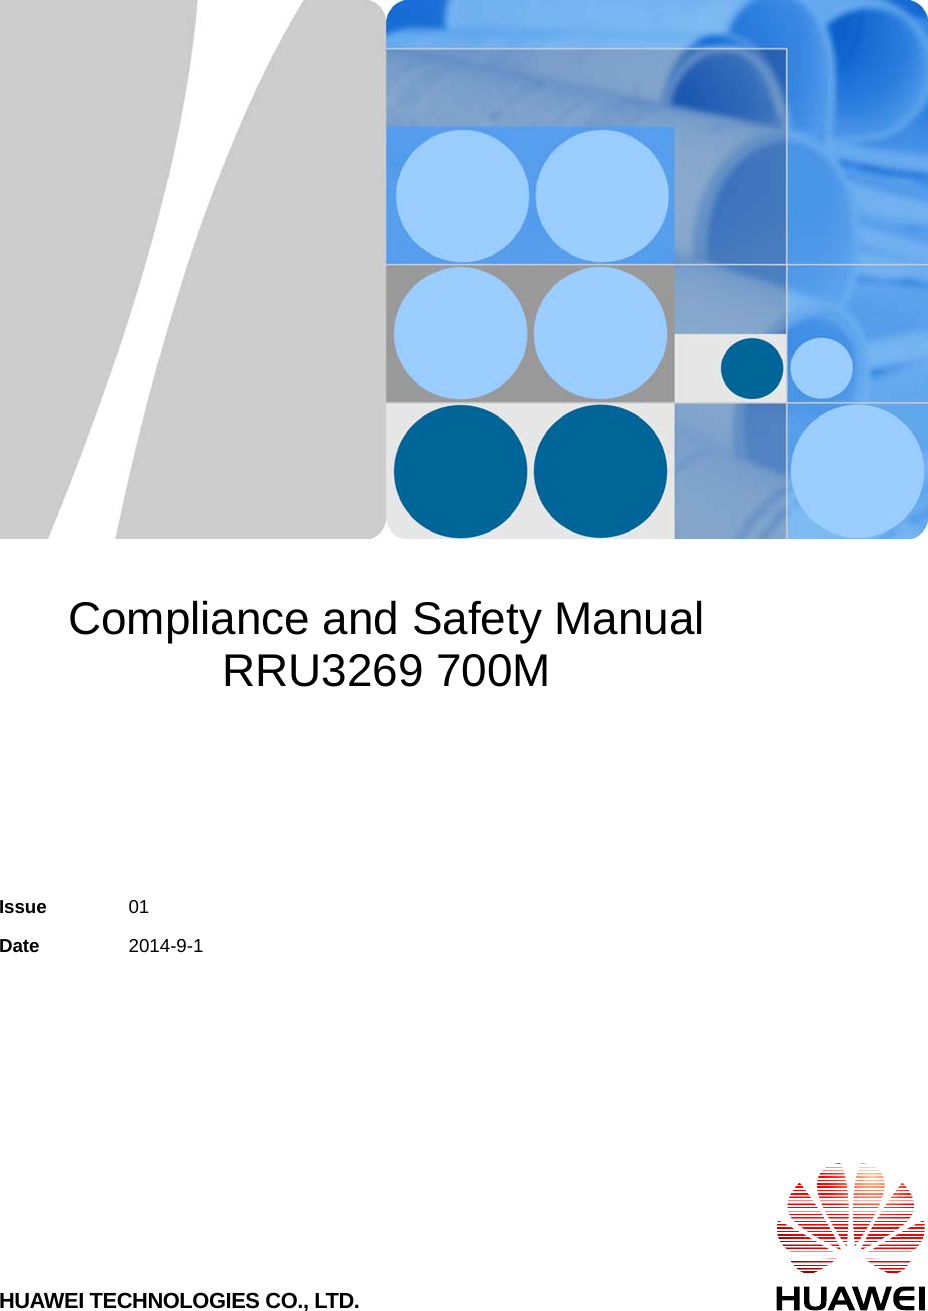       Compliance and Safety Manual RRU3269 700M    Issue  01 Date  2014-9-1 HUAWEI TECHNOLOGIES CO., LTD. 